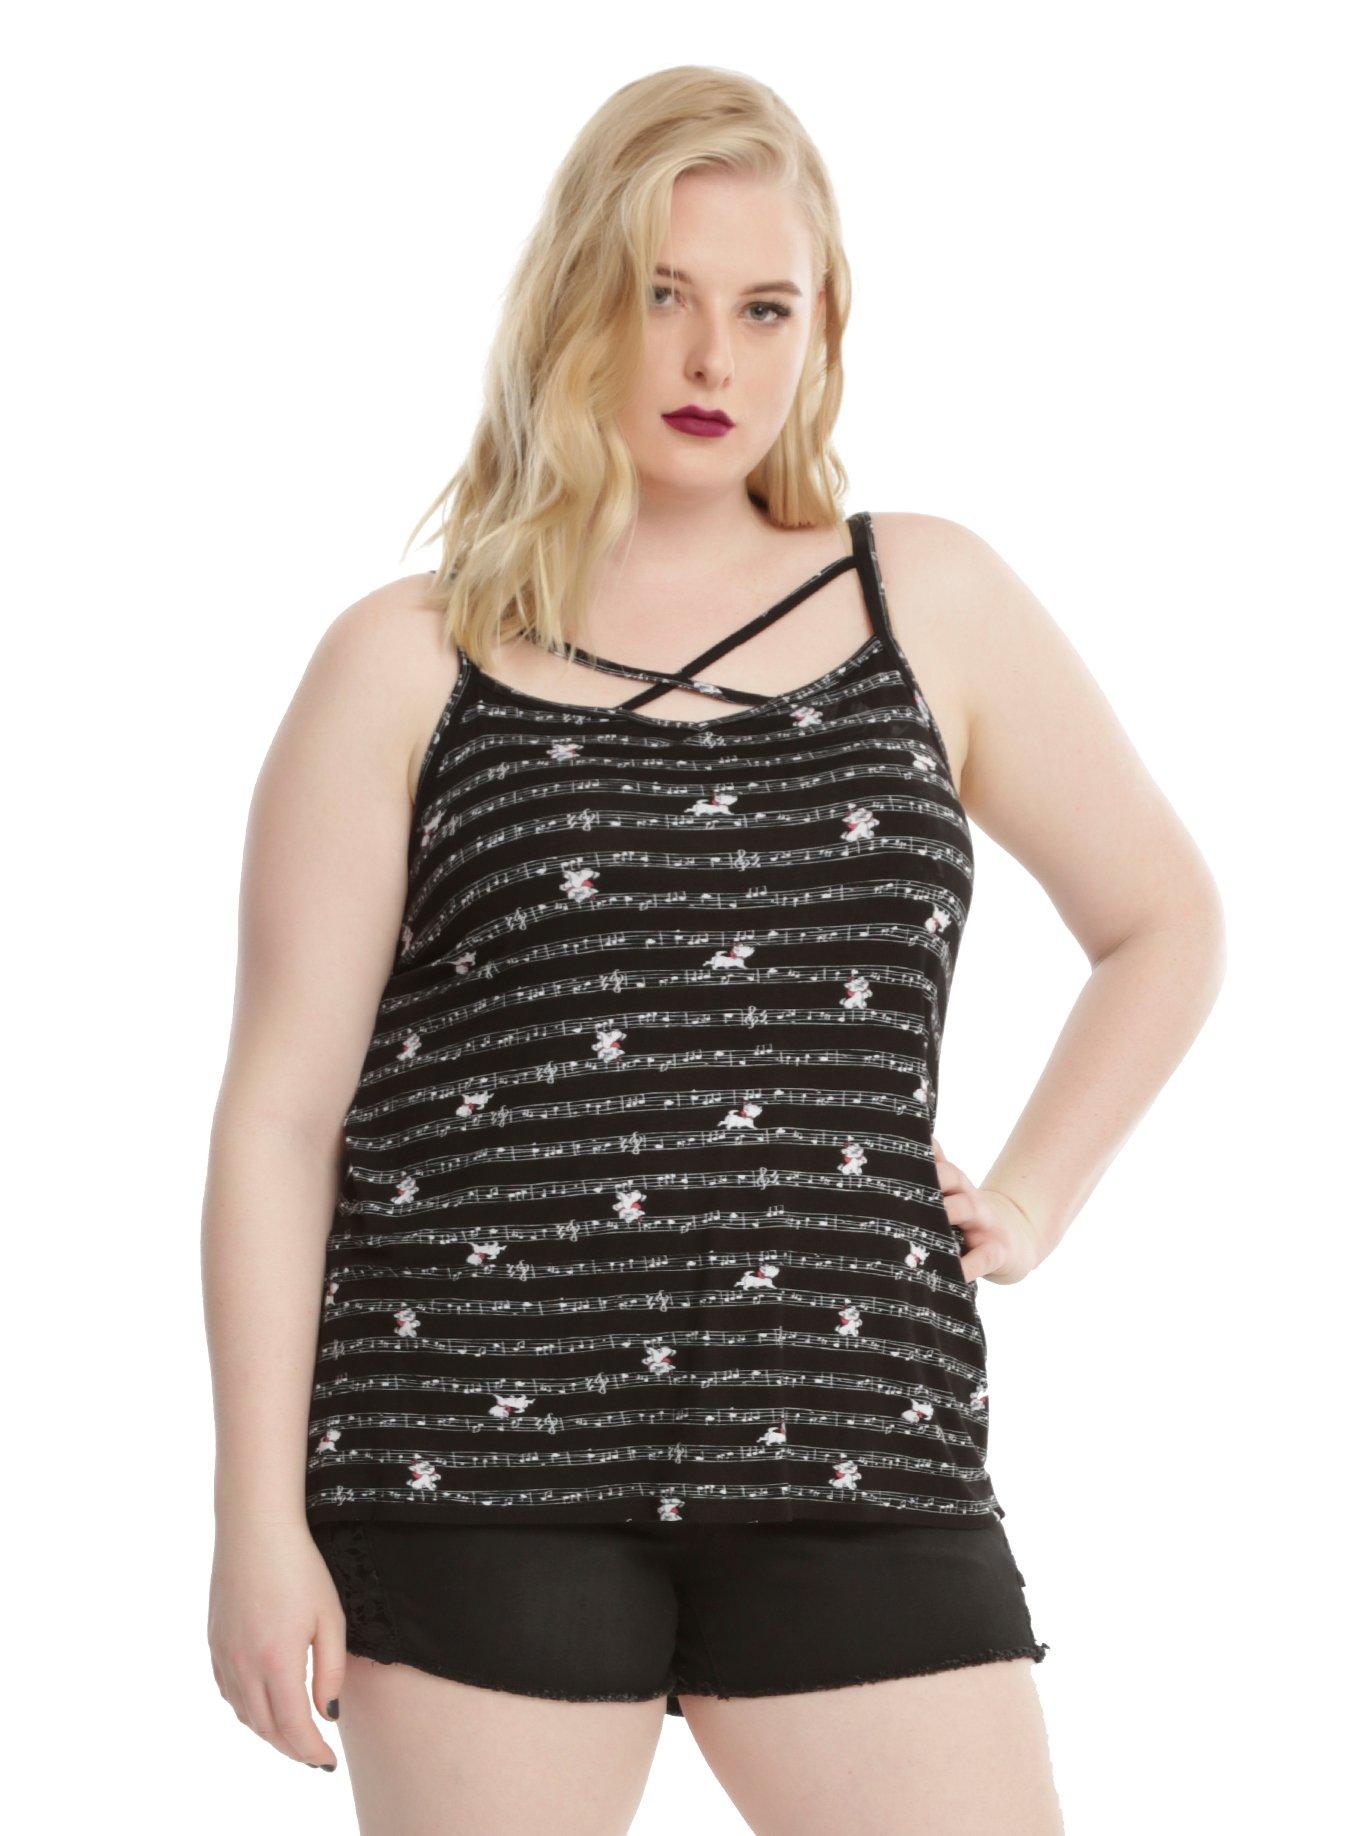 Disney The Aristocats Marie Music Staff Strappy Girls Tank Top Plus Size, BLACK, hi-res